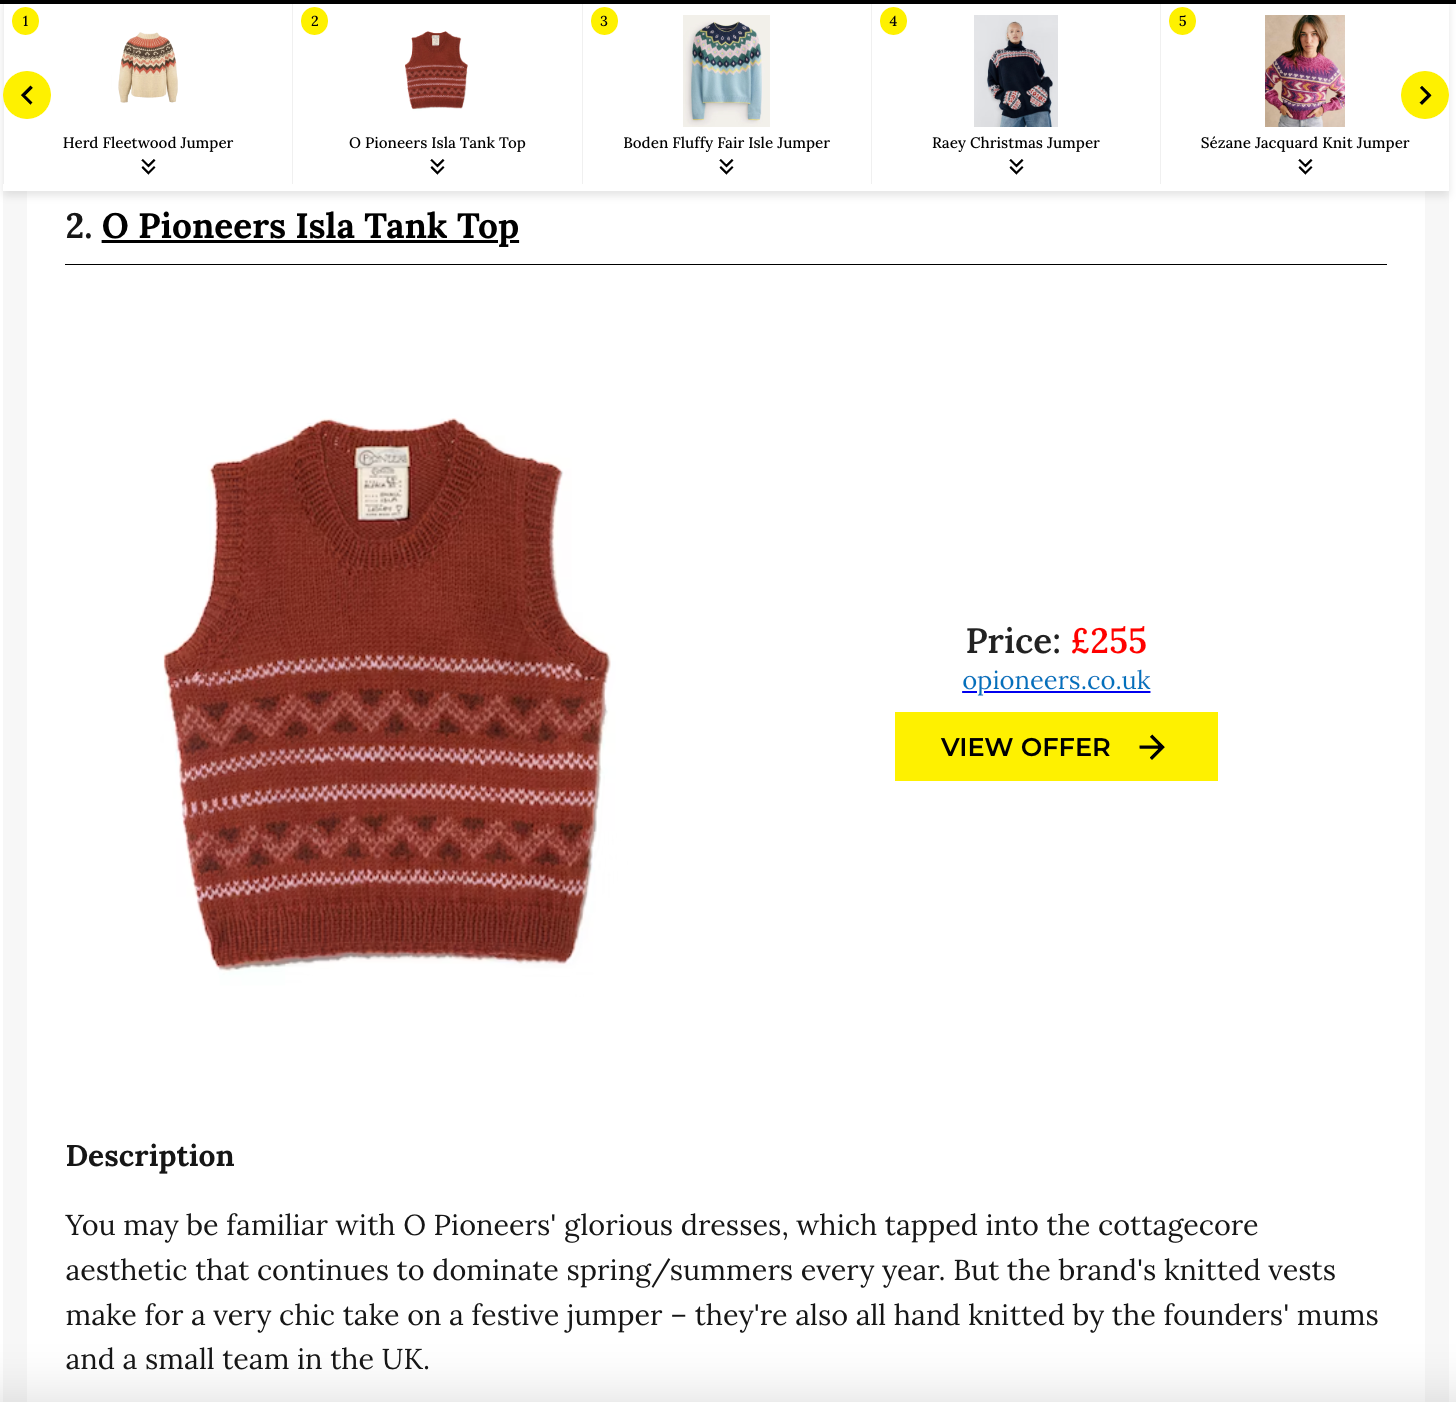 Grazia: The Best Christmas Jumpers You’ll Actually Want To Wear (Even After Santa’s Been And Gone)